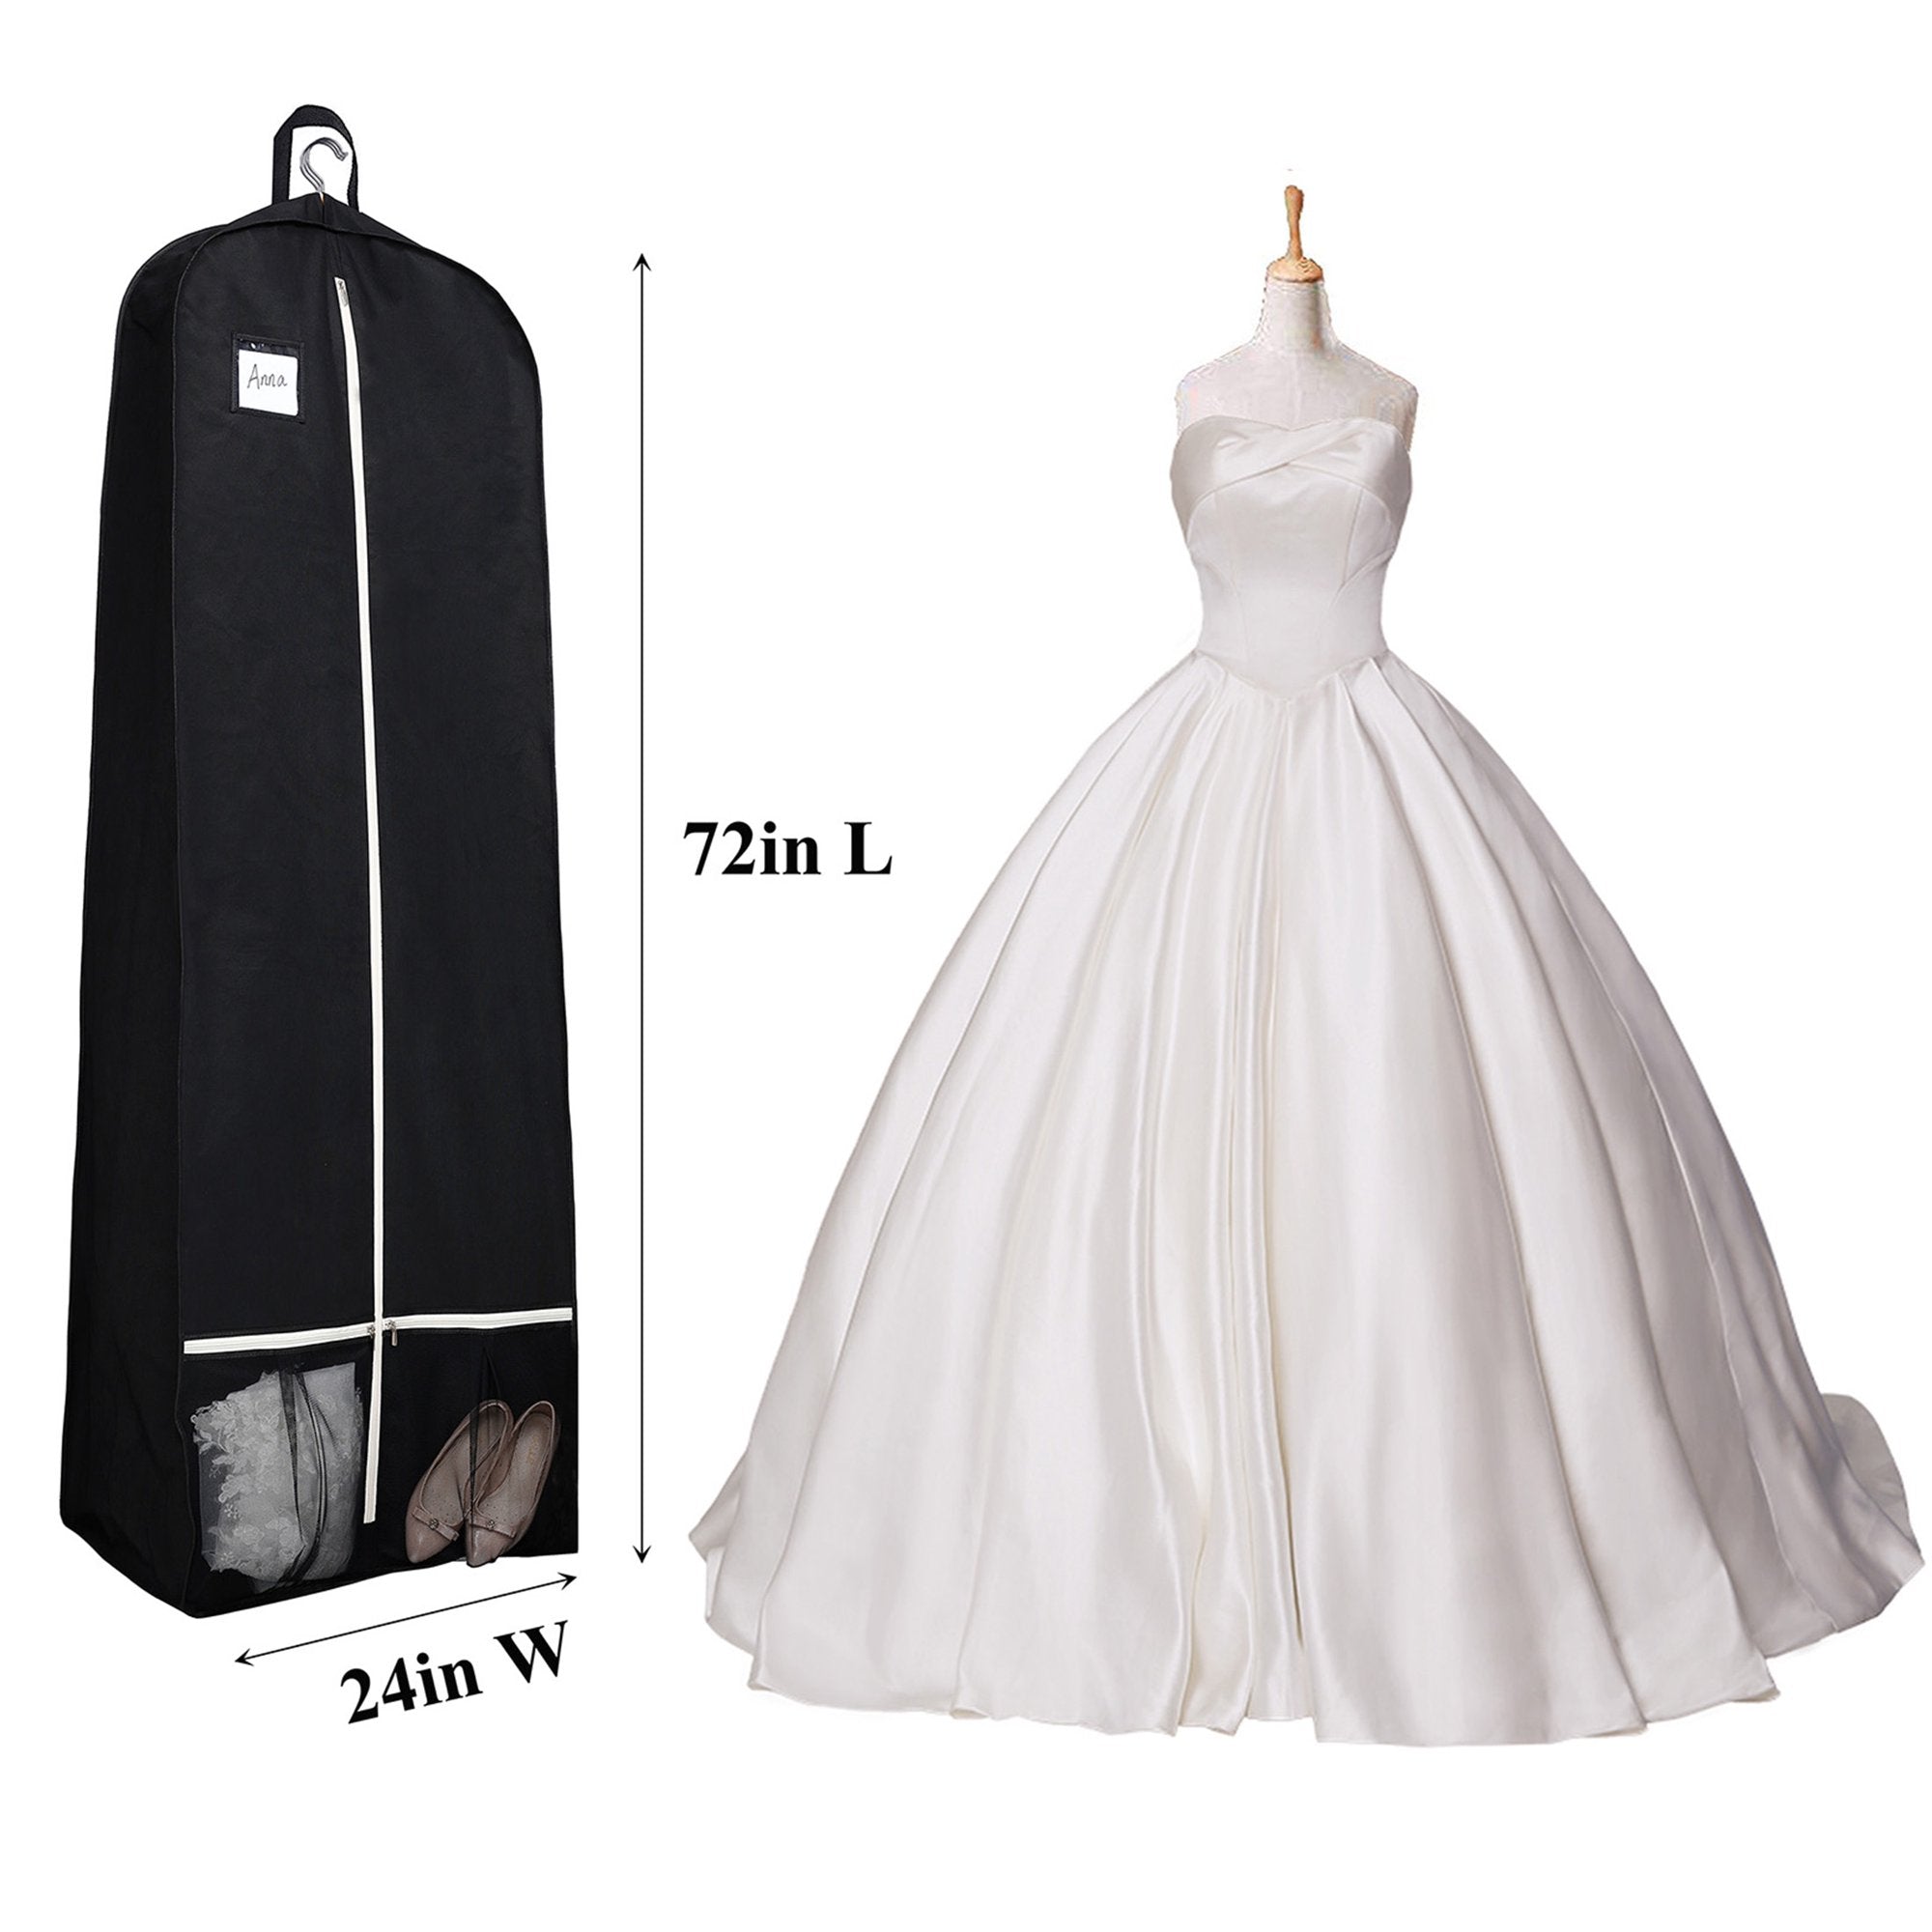 How to choose the right garment bag for your wedding dress | by Jenny Pink  | Medium